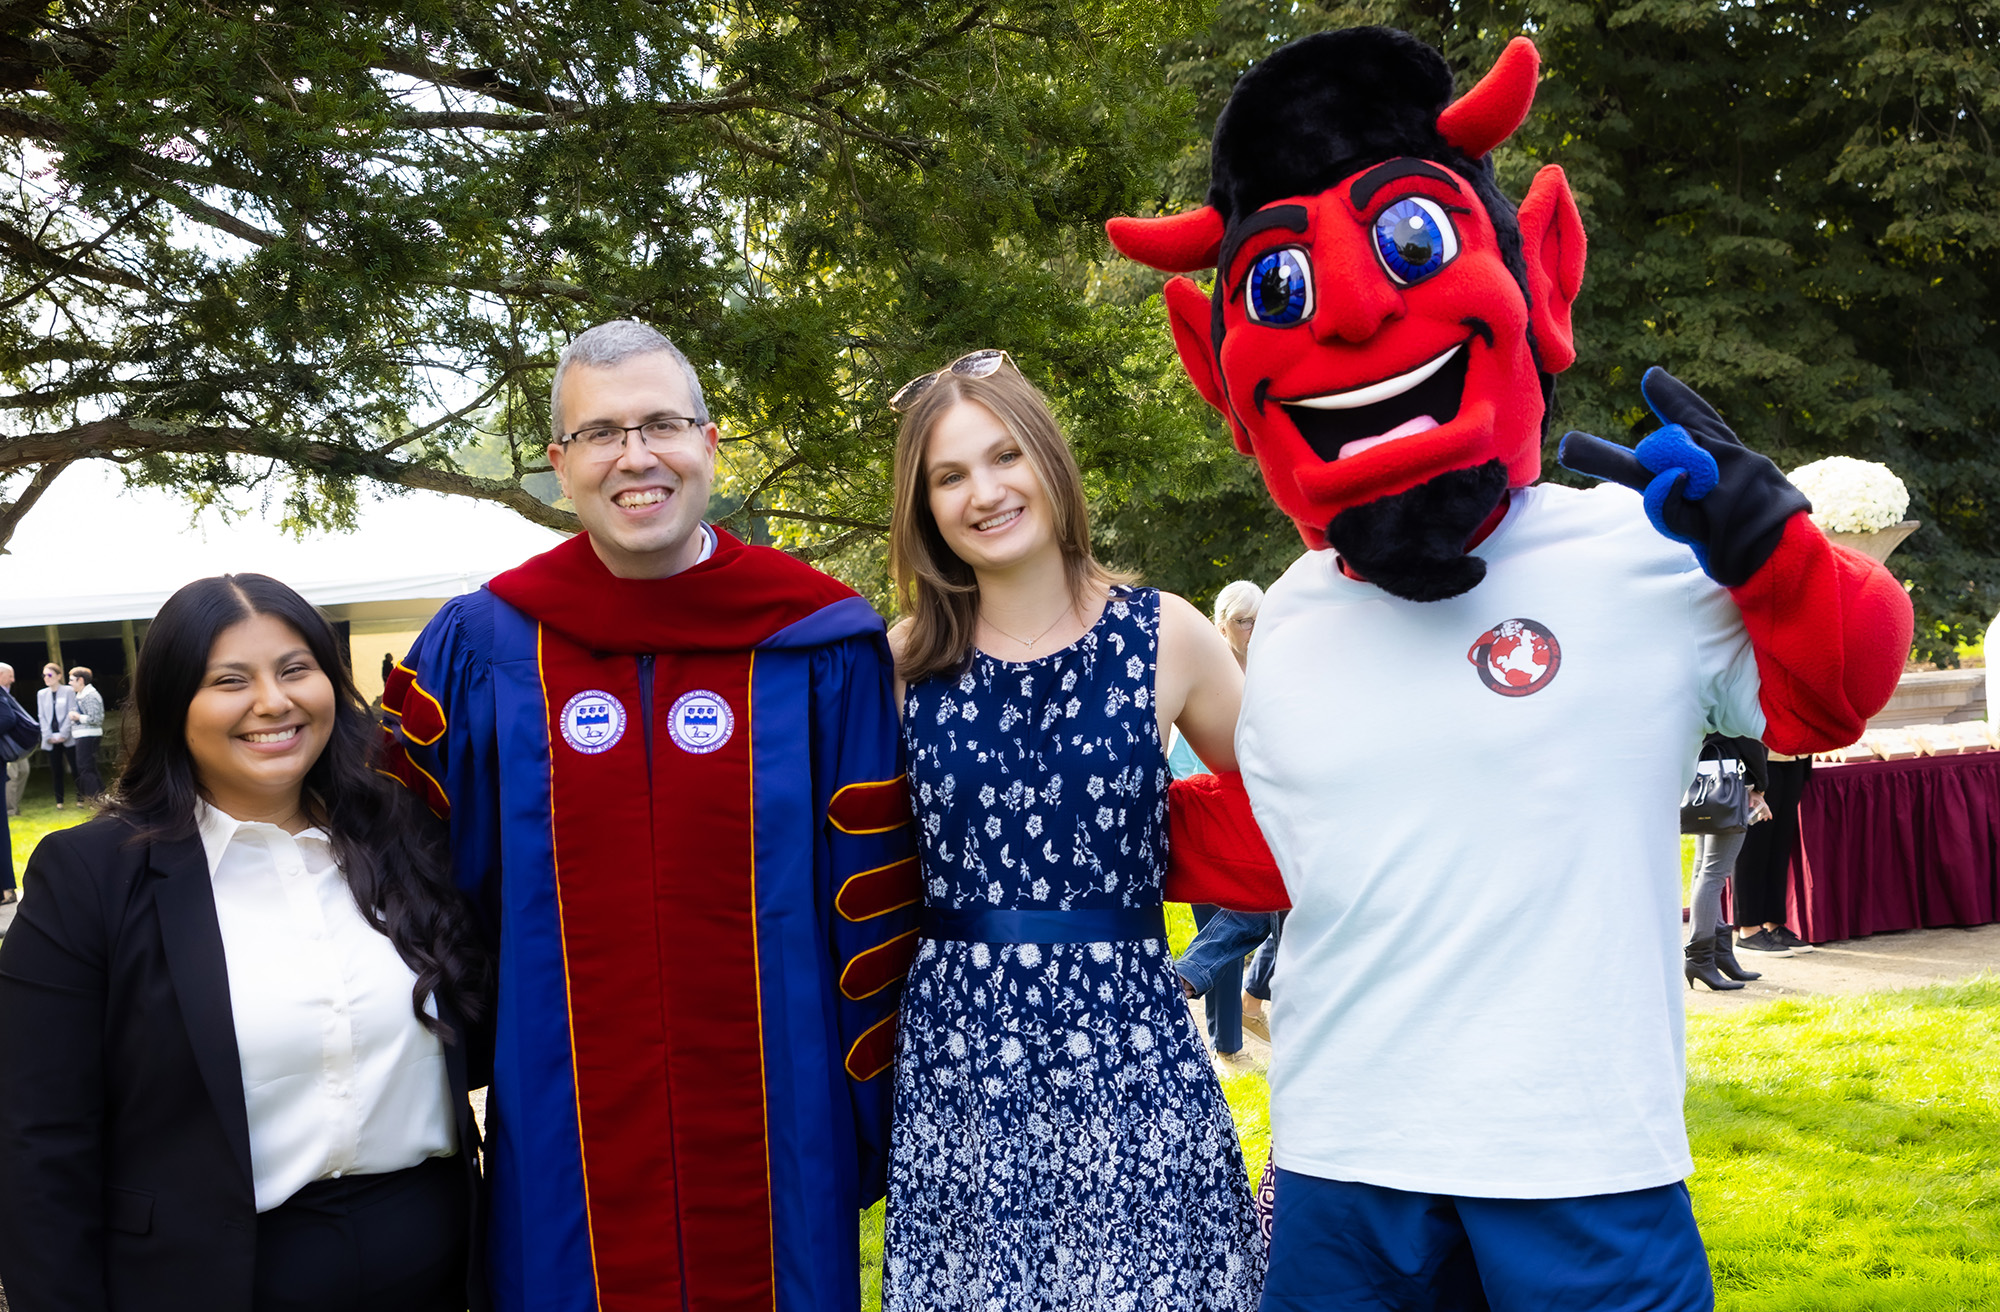 Two young women and a man pose for a photo with a Devil mascot.